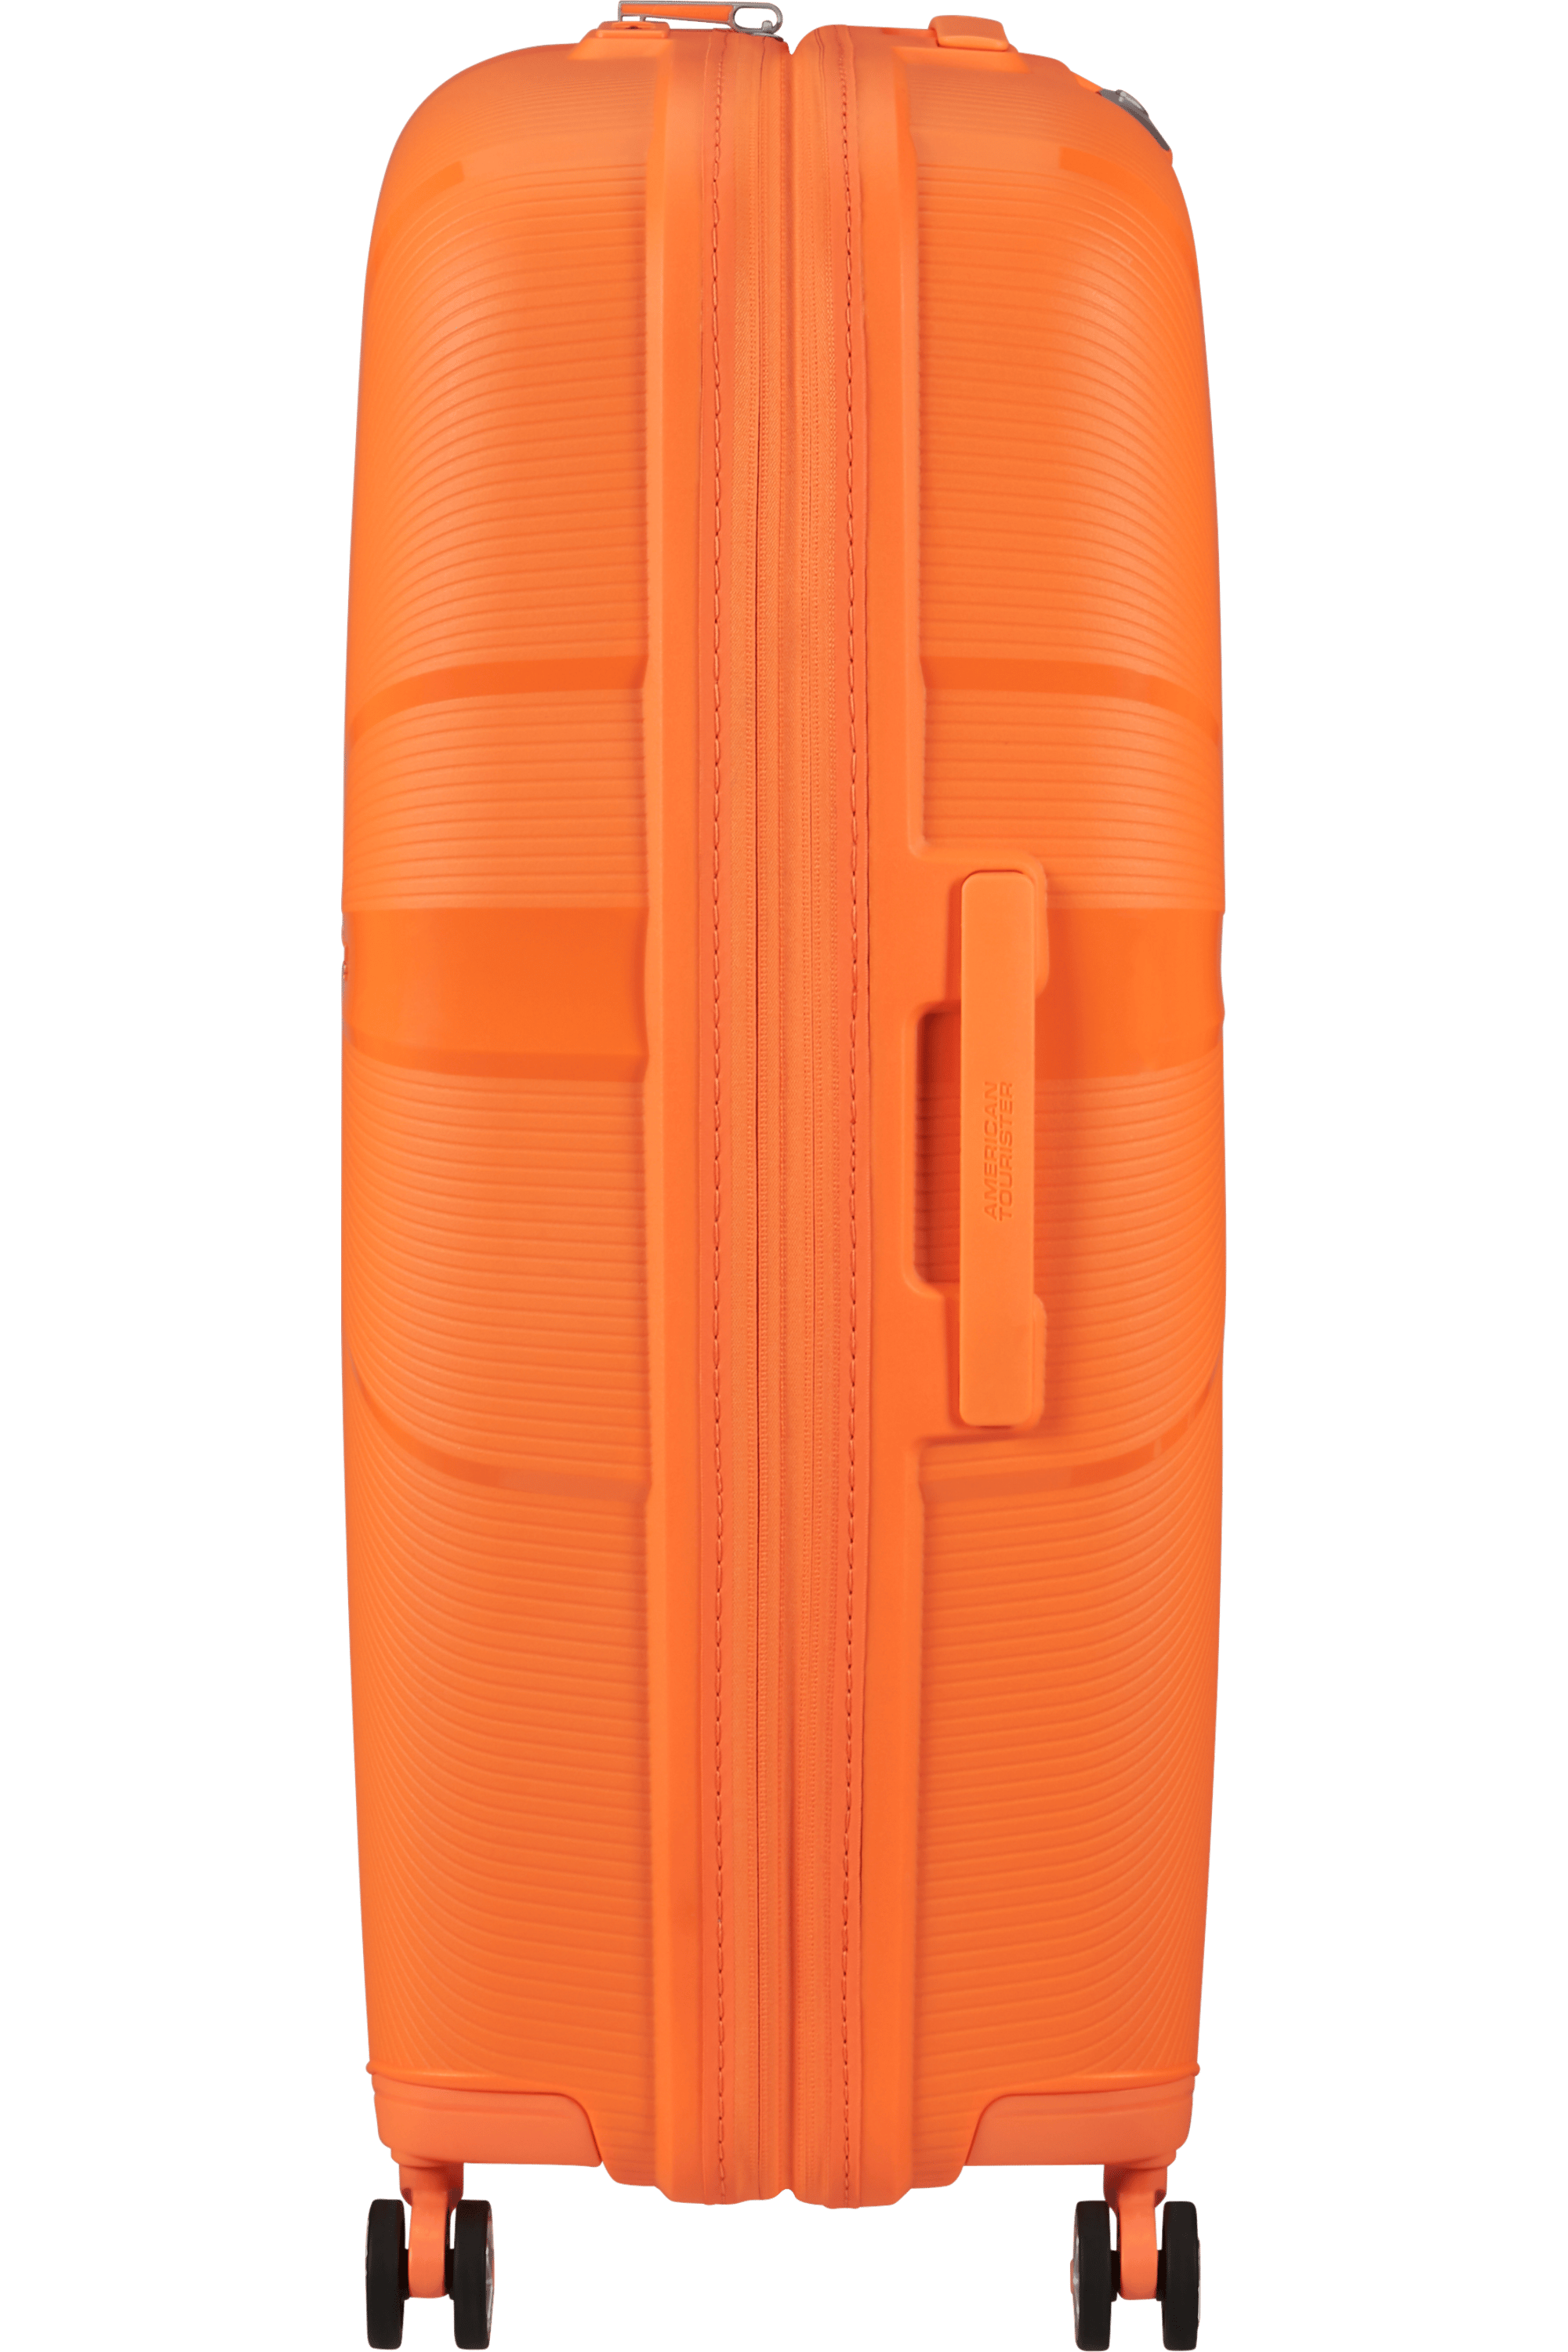 American Tourister StarVibe Trolley L papaya smoothie